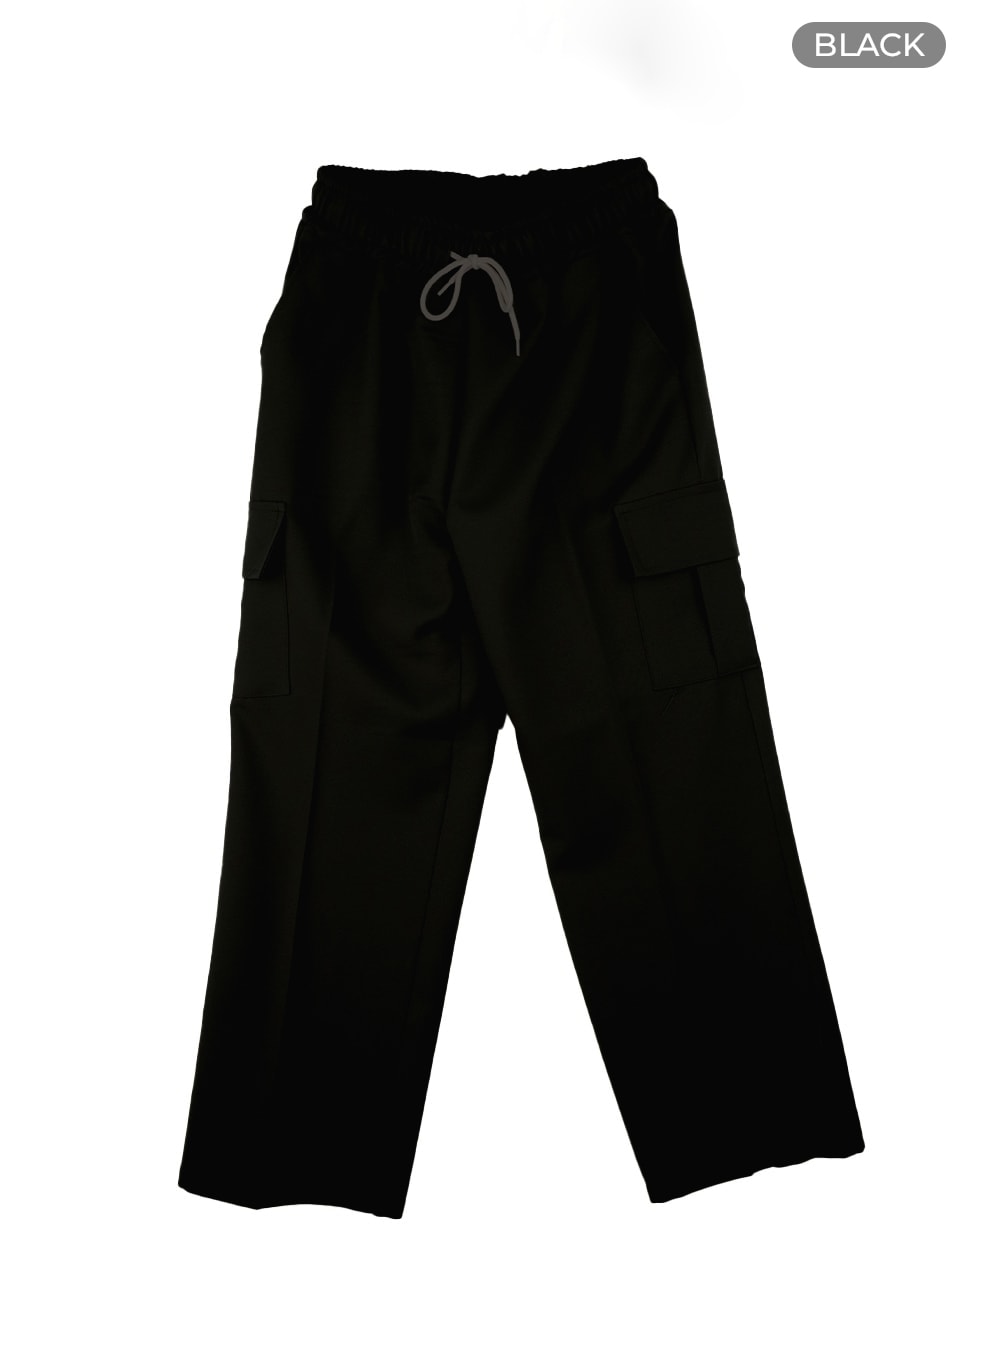 mens-basic-straight-fit-cotton-cargo-pants-ia401